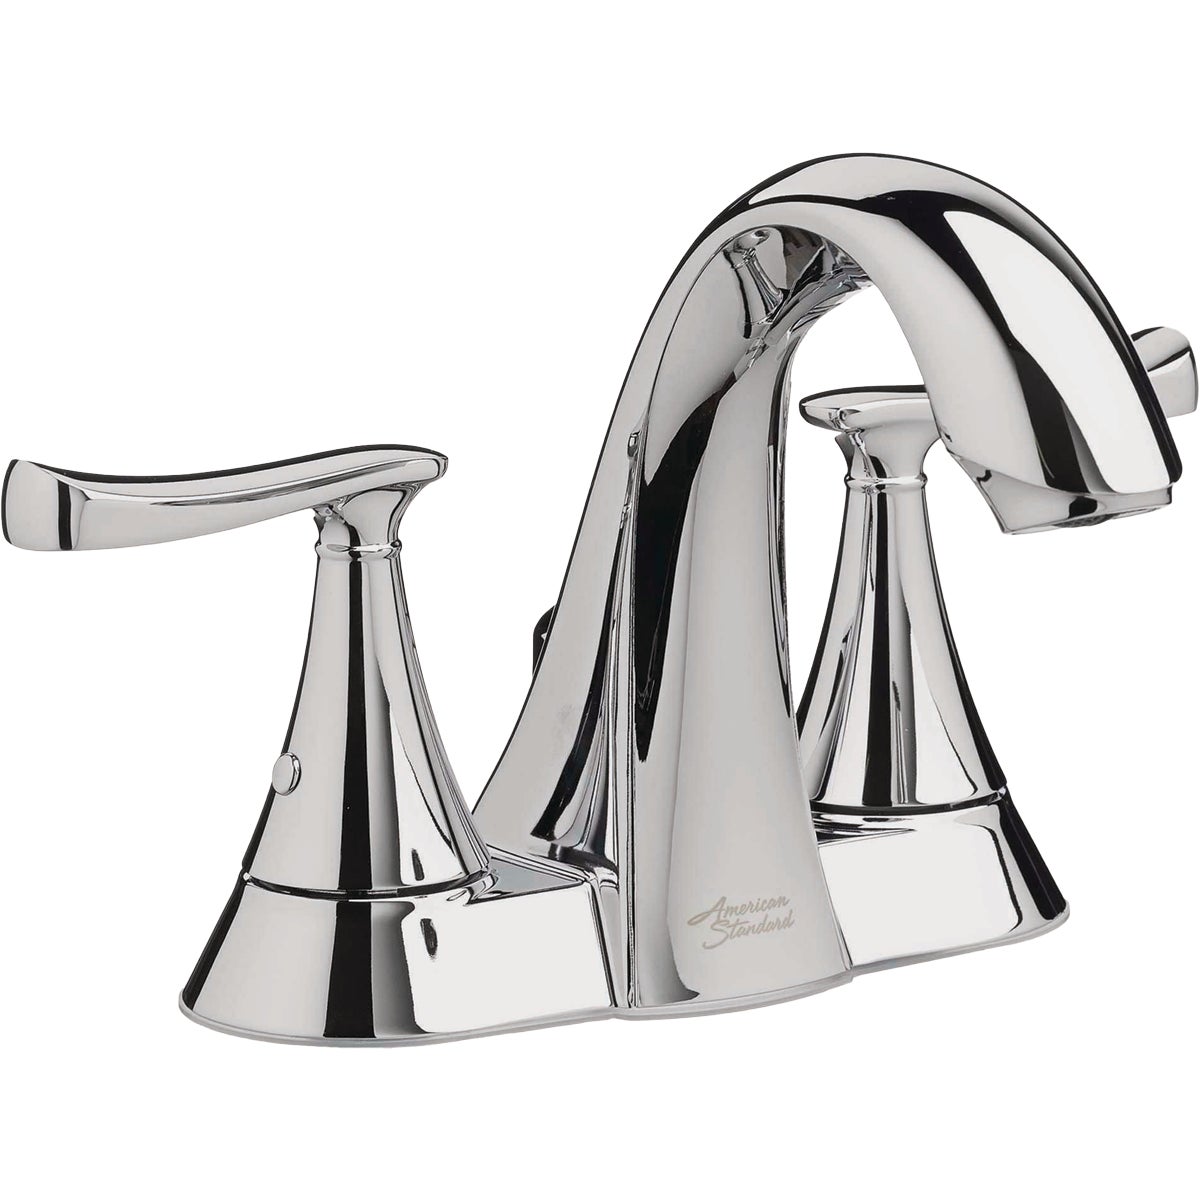 American Standard Chatfield Chrome 2-Handle Lever 4 In. Centerset Bathroom Faucet with Pop-Up